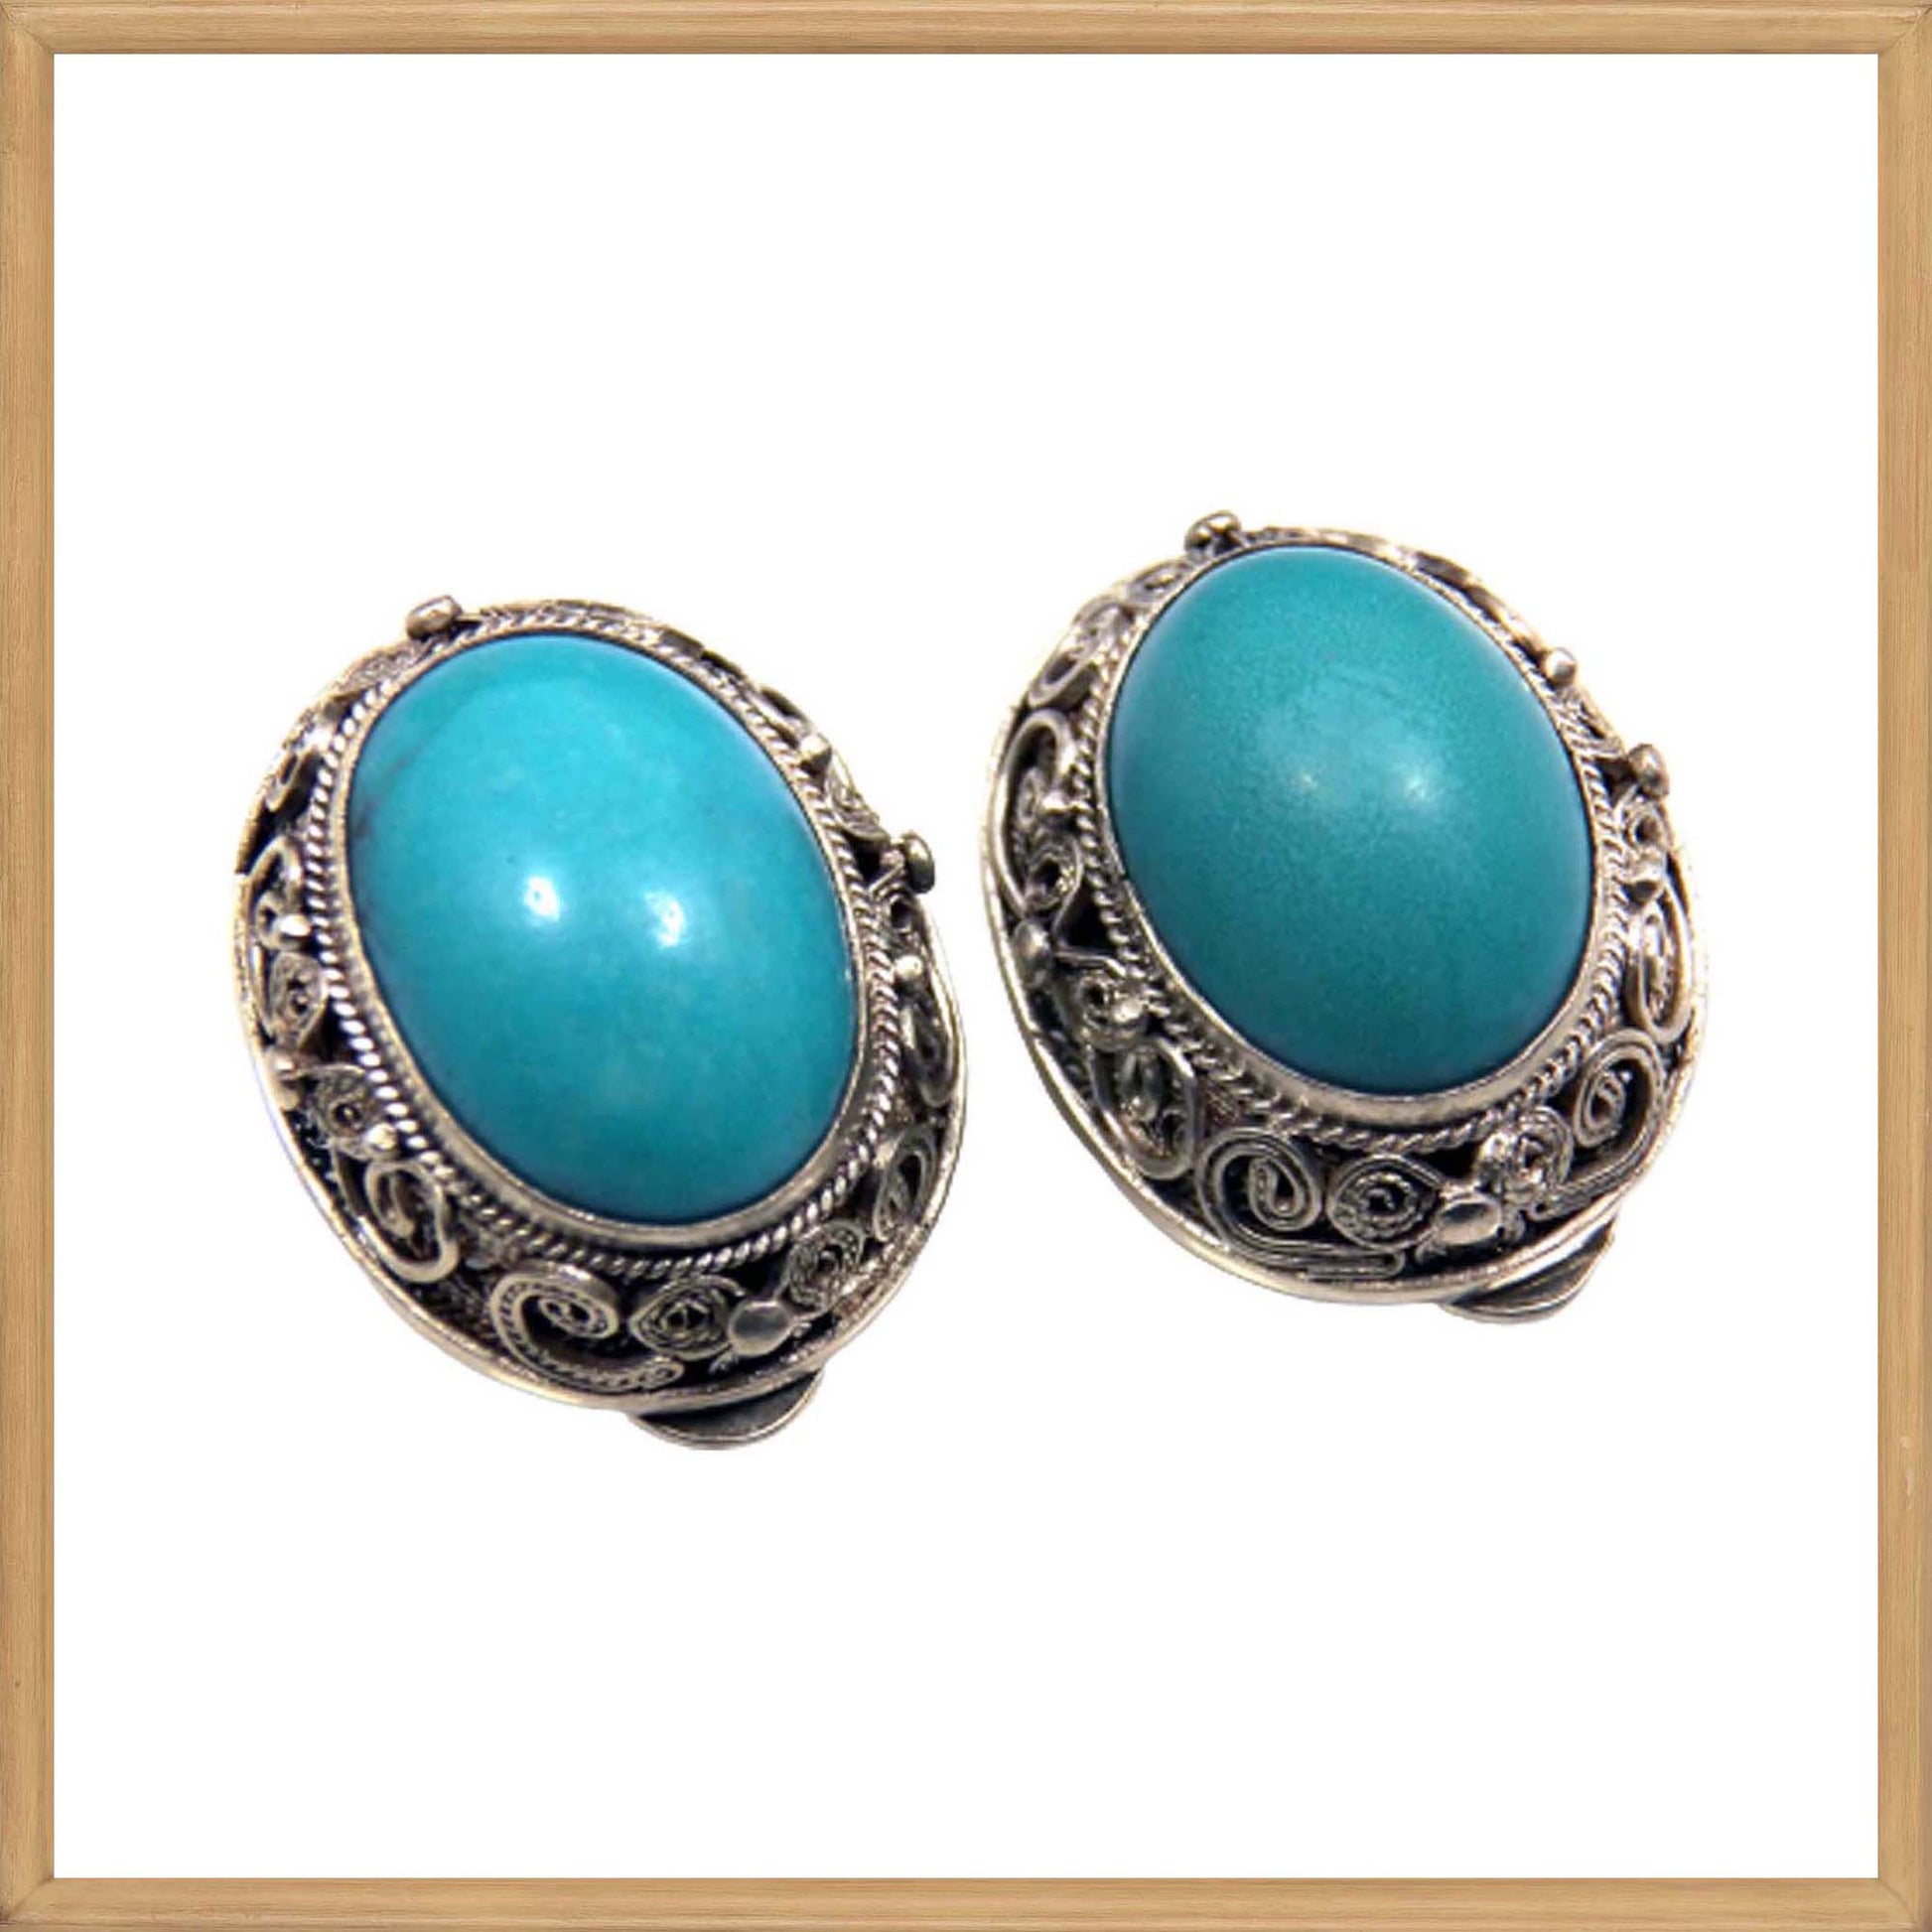 Antique Chinese Turquoise Clip on Earrings in Sterling Silver